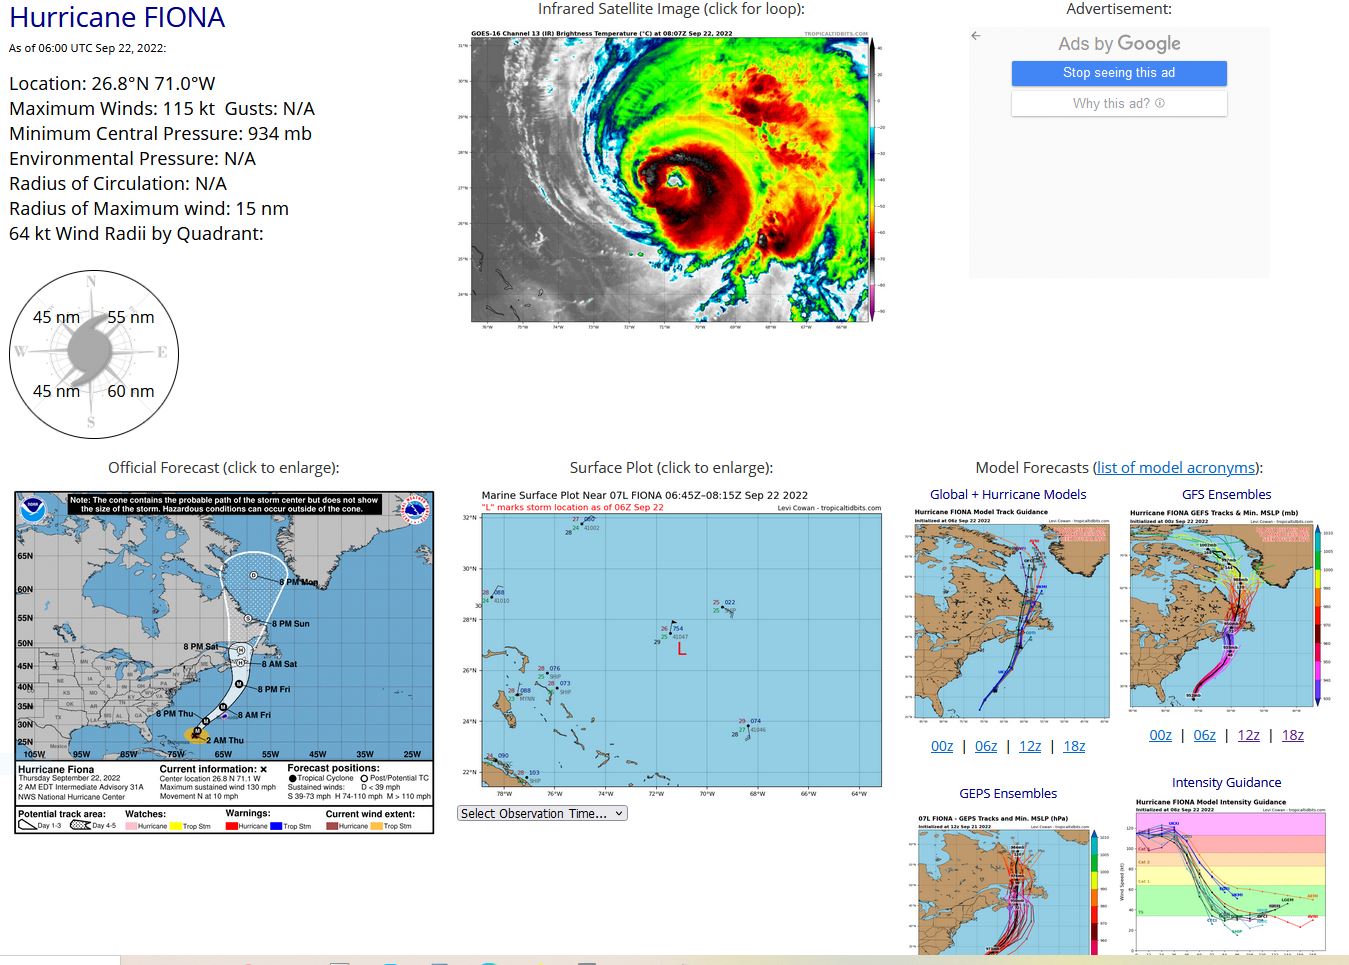 000 WTNT42 KNHC 220857 TCDAT2  Hurricane Fiona Discussion Number  32 NWS National Hurricane Center Miami FL       AL072022 500 AM EDT Thu Sep 22 2022  Fiona is showing signs of slow decay in satellite imagery, with the  eye gradually becoming cloud filled and the eyewall convection  becoming more ragged.  However, this has not yet led to a  significant decrease in the satellite intensity estimates, which  range from 100-130 kt.  The initial intensity is held at 115 kt  pending the arrival of the next Air Force Reserve Hurricane Hunter  aircraft, but this could be a little generous.  The hurricane has turned north-northeastward during the past several  hours with the initial motion now 025/11 kt.  Fiona is expected to  accelerate in a generally north-northeasterly direction for the next  24 h or so as it is steered along the southern edge of the  mid-latitude westerlies.  This motion should take the center  northwest of Bermuda in 24-30 h.  After that time, an even faster  motion is forecast as the hurricane interacts with a powerful  deep-layer trough moving into the Atlantic from the northeastern  United States. This interaction should steer the cyclone toward  Atlantic Canada later Friday and Friday night.  After 48 h, a  northward motion at a decreasing forward speed is expected, with the  center moving near or over, eastern Nova Scotia, the Gulf of St.  Lawrence, and portions of Newfoundland and Labrador into the  Labrador Sea by days 4 and 5.  The track guidance remains very  tightly clustered, and the new NHC track forecast is again mainly an  update of the previous prediction.  Little change, or perhaps a slow decrease in intensity is expected  during the next 24 h or so while Fiona remains over warm waters of  29-30 degrees Celsius and in a generally low-shear environment.   After that, interaction with the aforementioned mid-latitude trough  should begin the process of extratropical transition, which should  complete between 48-60 h as the center of Fiona approaches Nova  Scotia.  The extratropical low is forecast to continue producing  hurricane-force winds as it crosses Nova Scotia and moves into the  Gulf of St. Lawrence through 60 h, and it is expected to continue  producing gale-force winds as it moves across Newfoundland and  Labrador until near the end of the forecast period.  There is little  change in the intensity guidance from the previous advisory, and  there are only minor changes in the intensity forecast.  The wind radii were modified based on a combination of  scatterometer and synthetic aperture radar data.   Key Messages:  1. Hurricane conditions are expected on Bermuda tonight through  Friday morning, and a Hurricane Warning has been issued for the  island.  2. Fiona is expected to affect portions of Atlantic Canada as a powerful hurricane-force cyclone late Friday and Saturday, and significant impacts from high winds, storm surge, and heavy rainfall are becoming increasingly likely.  Interests in these areas should closely monitor the progress of Fiona and updates to the forecast.  3. Large swells generated by Fiona are expected to cause dangerous and possibly life-threatening surf and rip current conditions along the east coast of the United States, the Bahamas, Bermuda, and Atlantic Canada during the next few days.  Please consult products from your local weather office.   FORECAST POSITIONS AND MAX WINDS  INIT  22/0900Z 27.4N  70.6W  115 KT 130 MPH  12H  22/1800Z 29.3N  69.7W  115 KT 130 MPH  24H  23/0600Z 32.5N  66.9W  110 KT 125 MPH  36H  23/1800Z 37.4N  63.3W  105 KT 120 MPH  48H  24/0600Z 43.0N  61.3W   95 KT 110 MPH  60H  24/1800Z 46.7N  60.9W   75 KT  85 MPH...POST-TROP/EXTRATROP  72H  25/0600Z 49.7N  60.4W   55 KT  65 MPH...POST-TROP/EXTRATROP  96H  26/0600Z 57.0N  58.5W   35 KT  40 MPH...POST-TROP/EXTRATROP 120H  27/0600Z 62.5N  58.0W   30 KT  35 MPH...POST-TROP/EXTRATROP  $$ Forecaster Beven